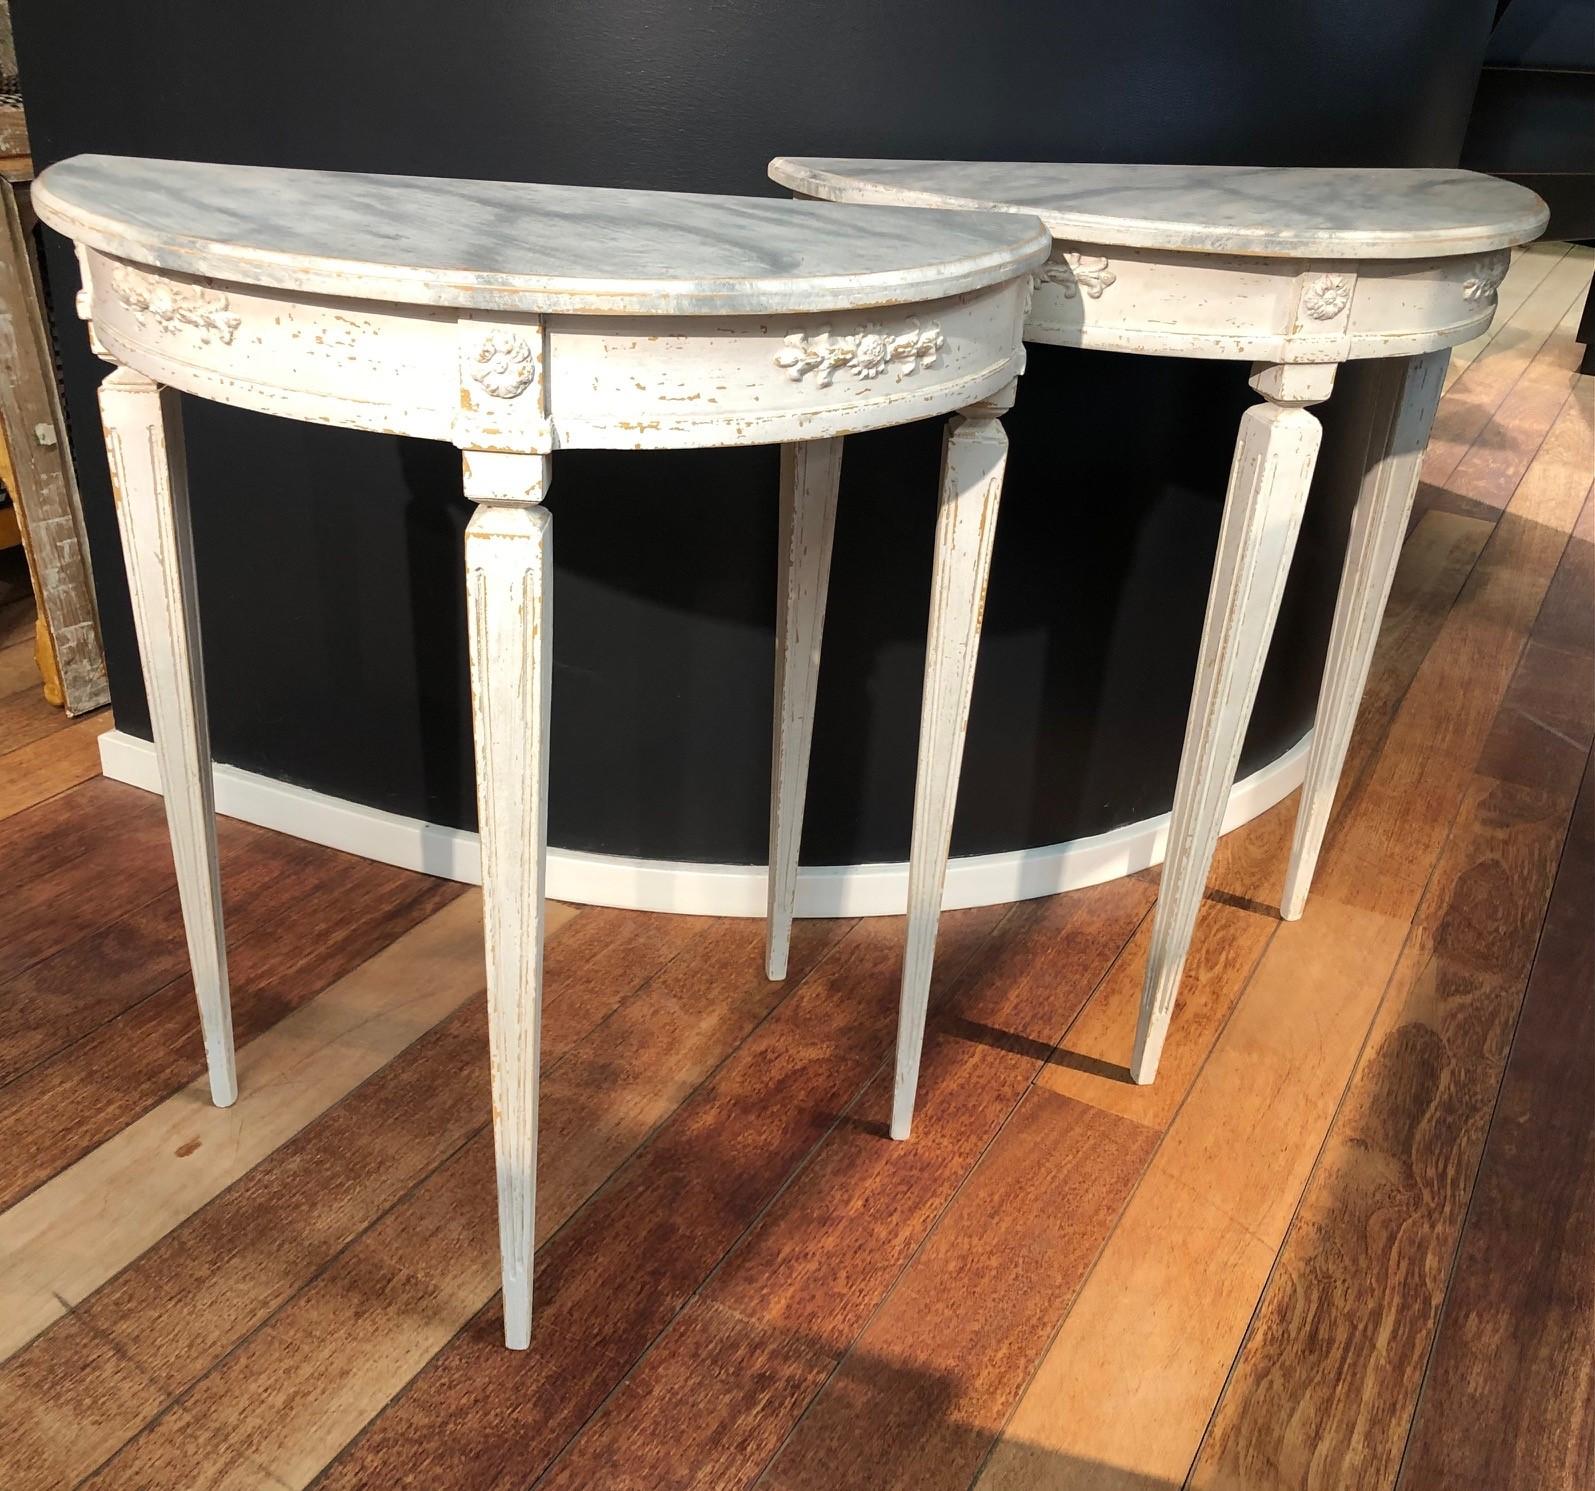 Elegant pair of demi lune console tables in Gustavian style.
Gray marbled table top with edge profile, frame with flower and foliage ornamentation.
Lower part blue painted, tapered legs with flutes.
Sweden approx. 1900.